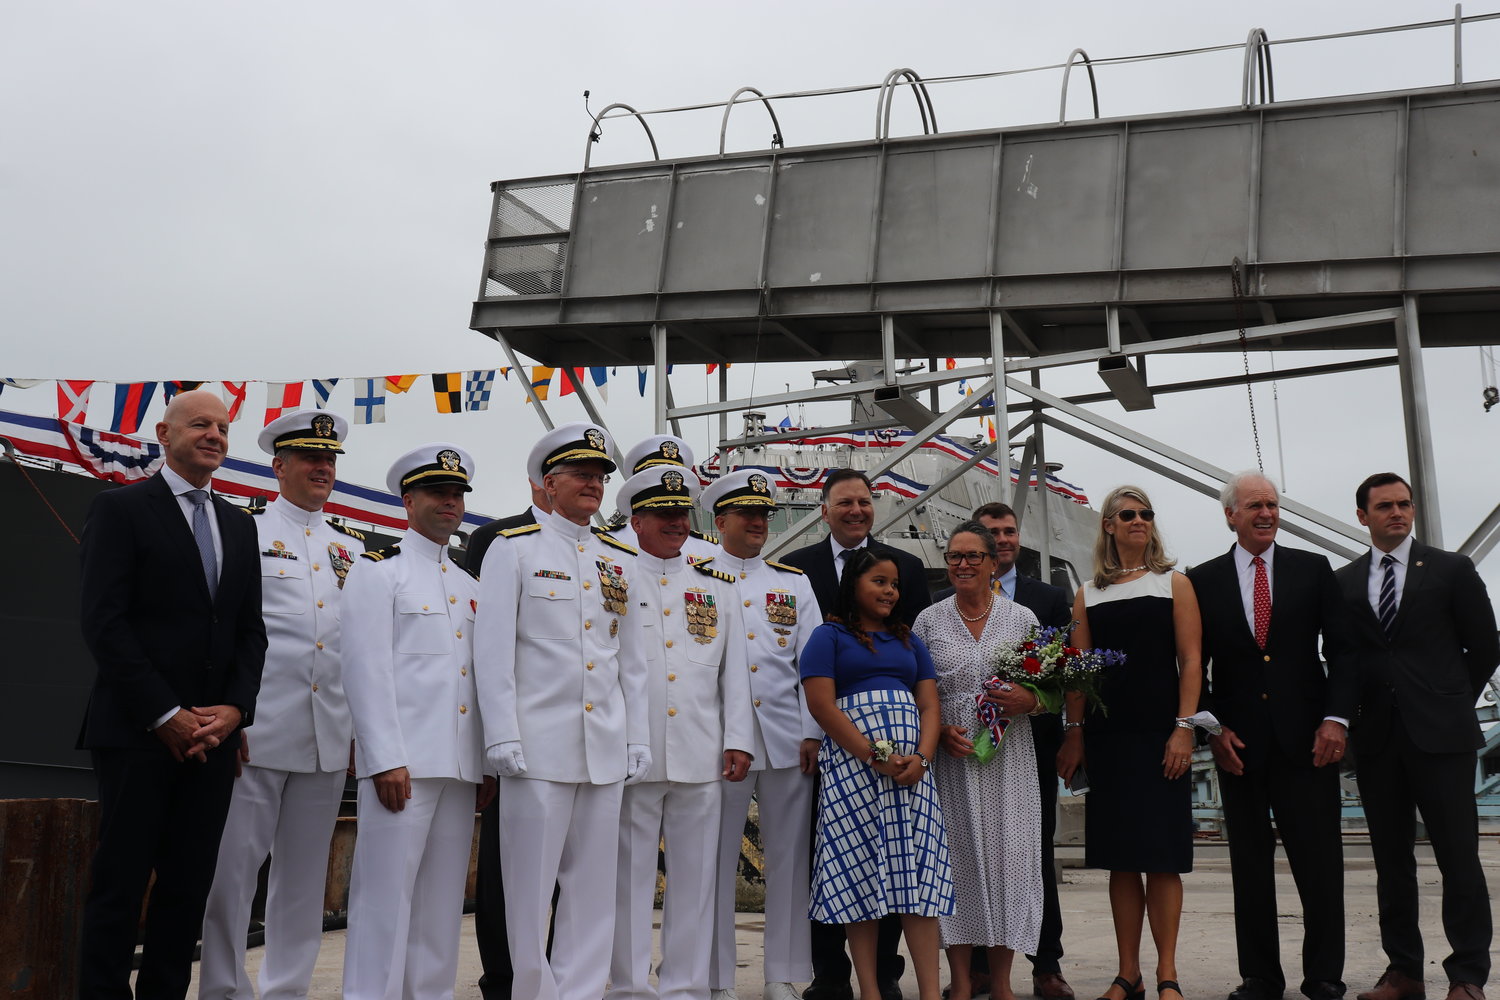 Nantucket town manager Libby Gibson, third from right, among the dignitaries at the christening of the USS Nantucket Saturday.